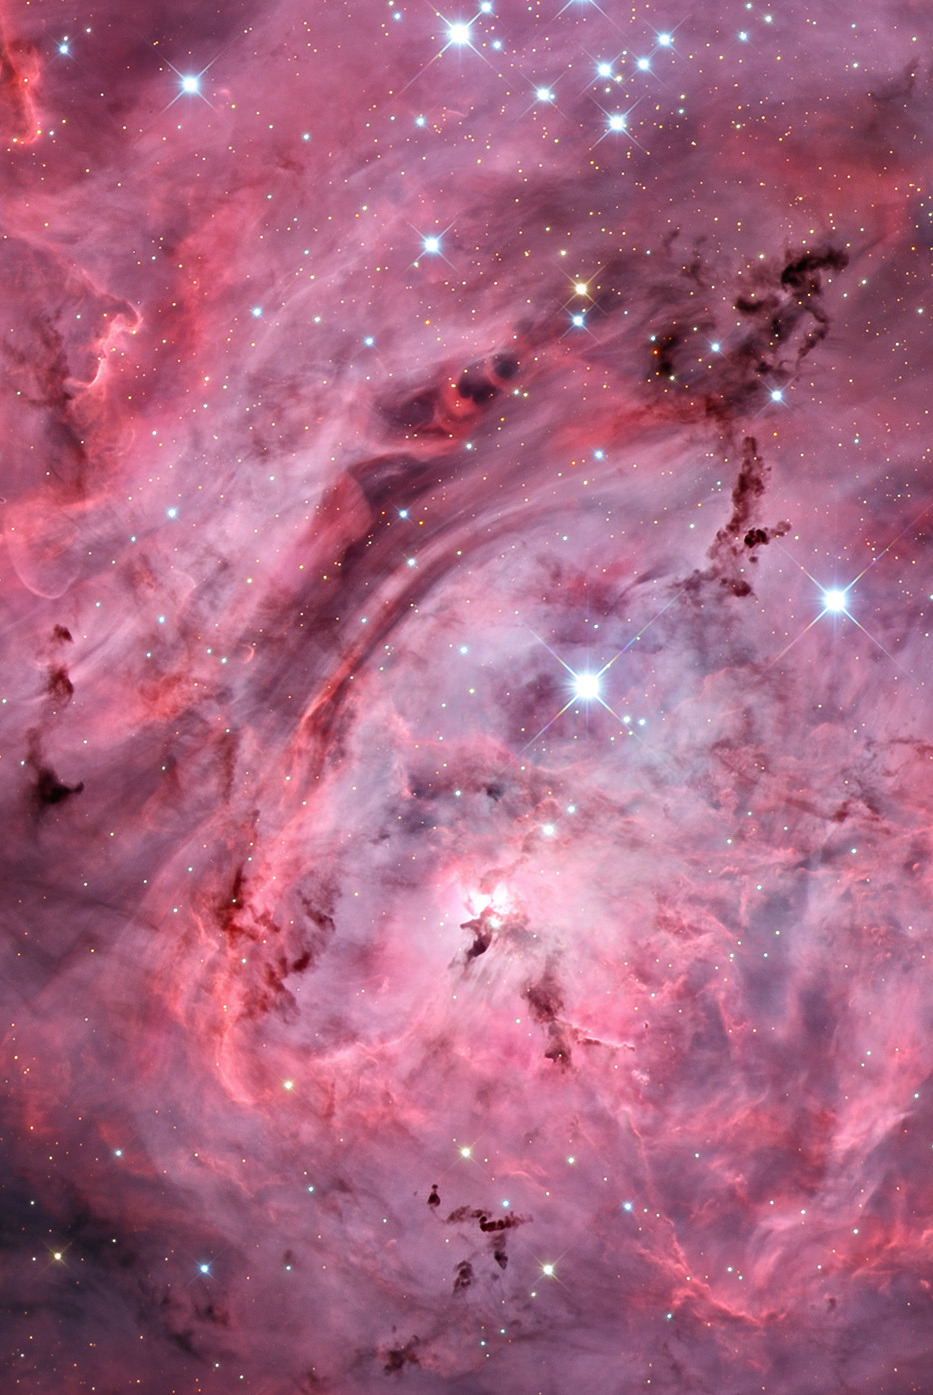 astronomicalwonders:<br />“ The Lagoon Nebula - M8  4000 light-years away in the constellation Sagittarius there is a region of space known as the Lagoon Nebula. This giant cloud of gas and dust is creating intensely bright young stars, and is home to...